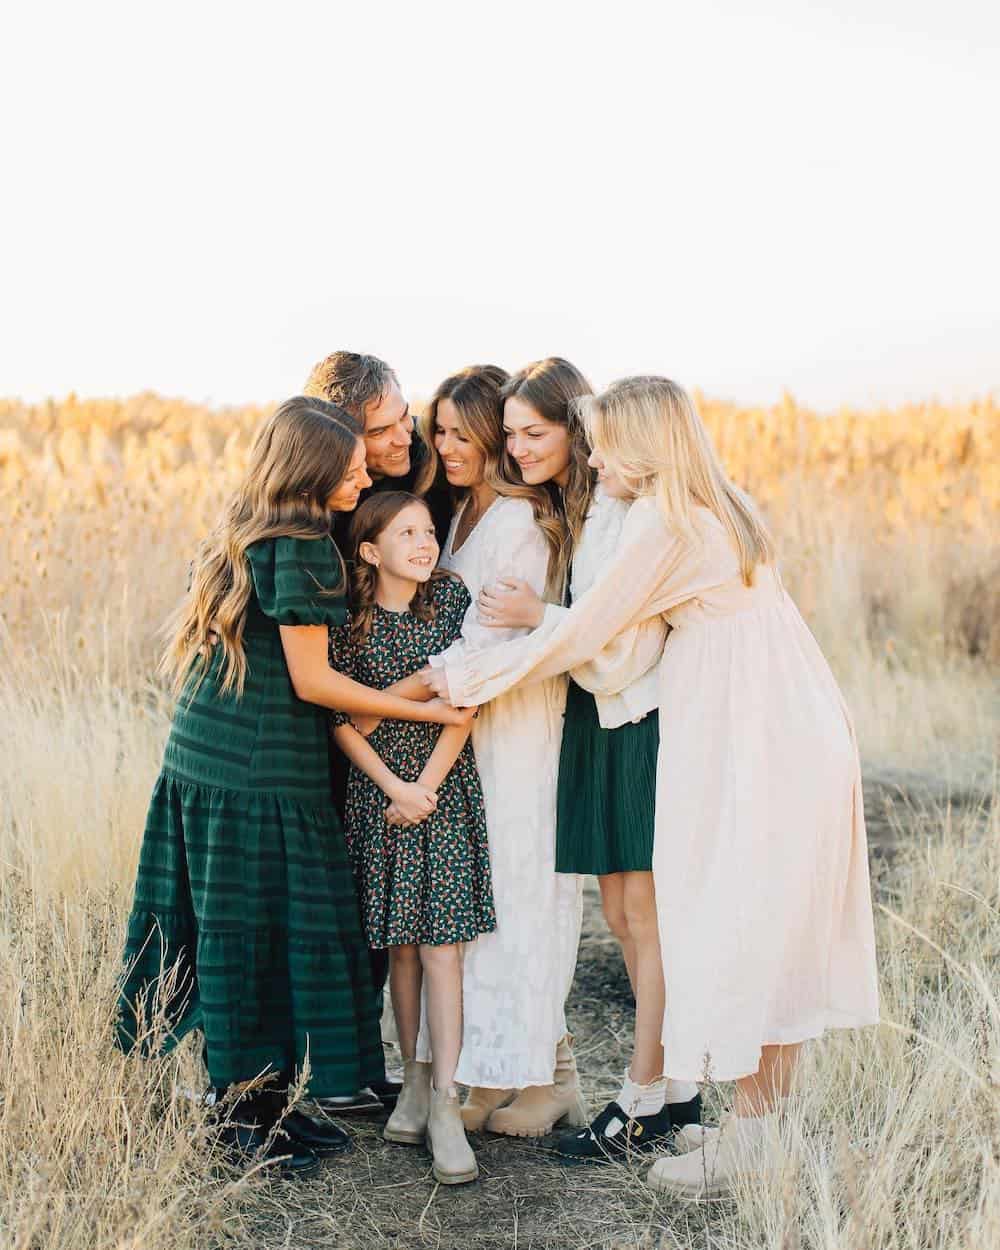 image of a family having an outdoor fall photoshoot wearing a mix of cream and forest green